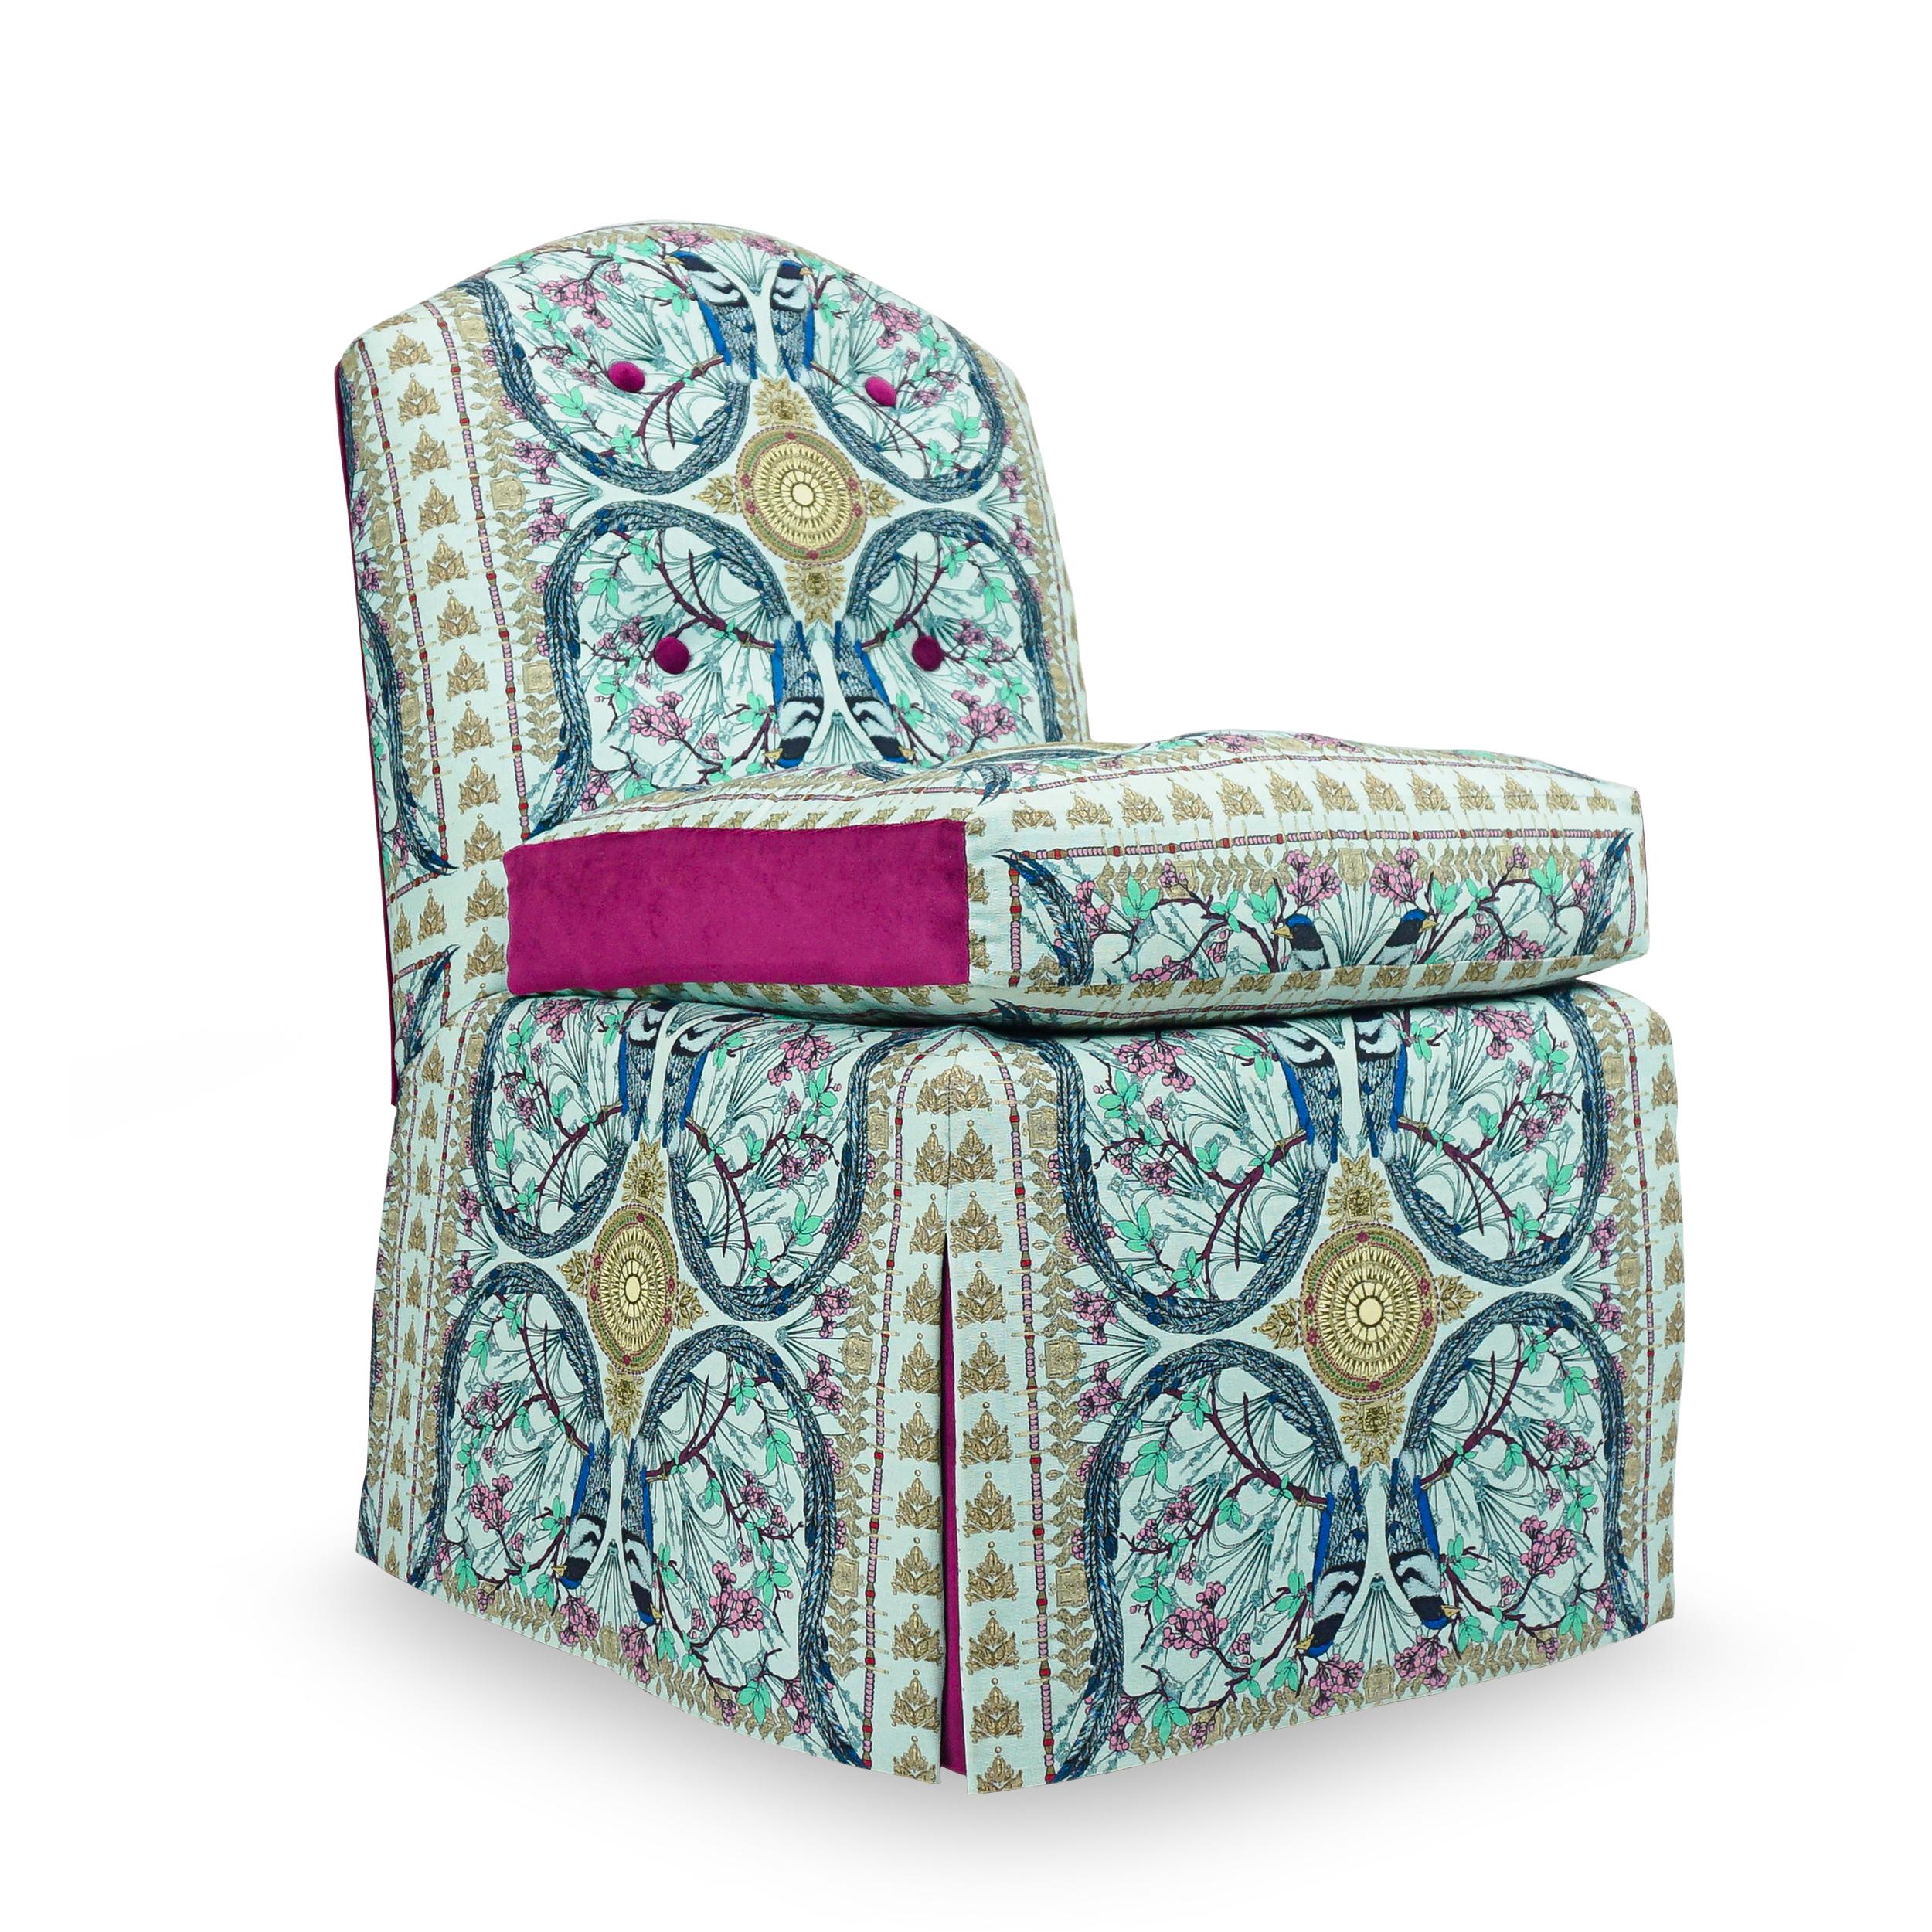 Petite slipper chair made with a solid hard maple topped with a tight back, feather wrapped dense foam attached seat cushion, and tailored skirt. Fabrics are an Osborne & Little Lyrebird print with Velutto Velvet accents on seat cushion, back and